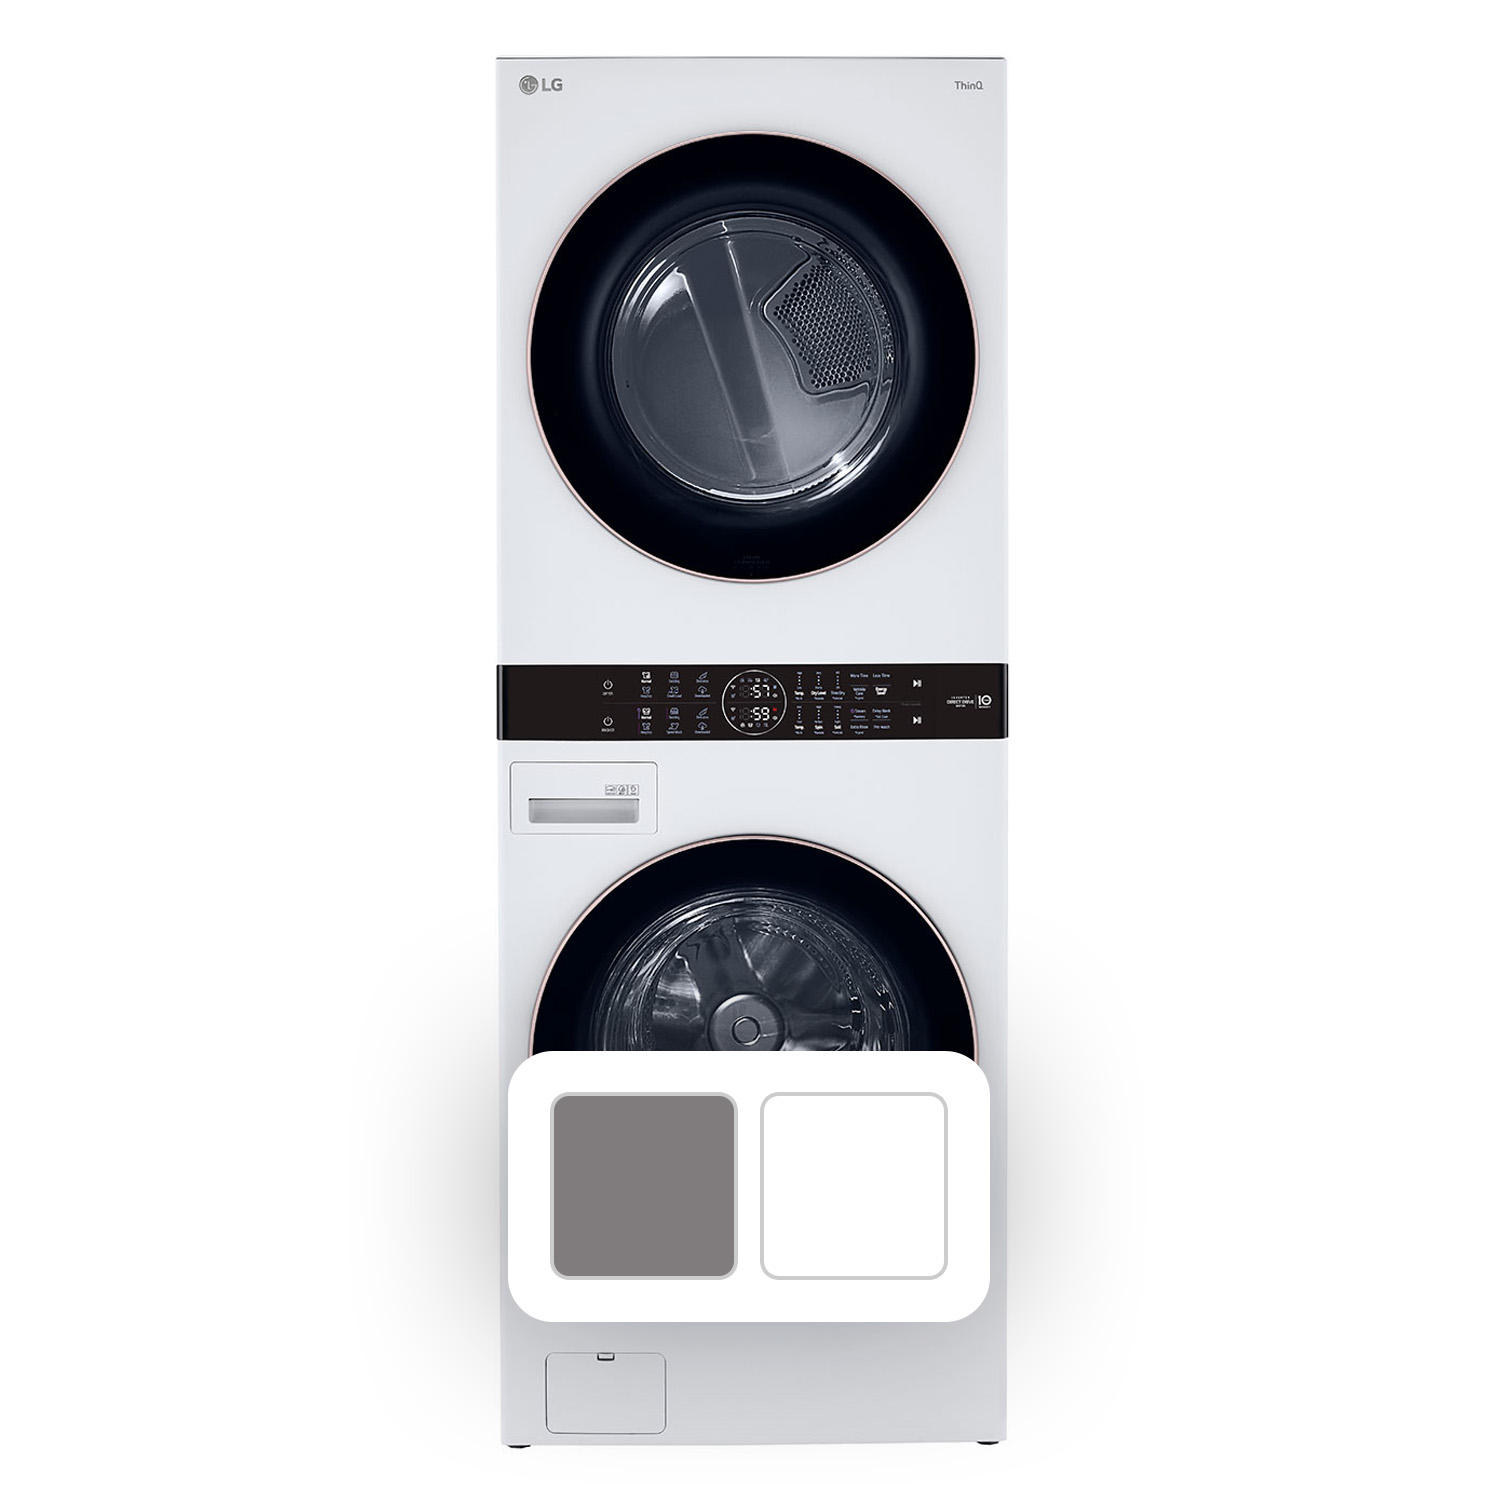 LG 4.5 Cu. Ft. Front Load Washer & 7.4 Cu. Ft. Electric Dryer WashTower Laundry Center (White)